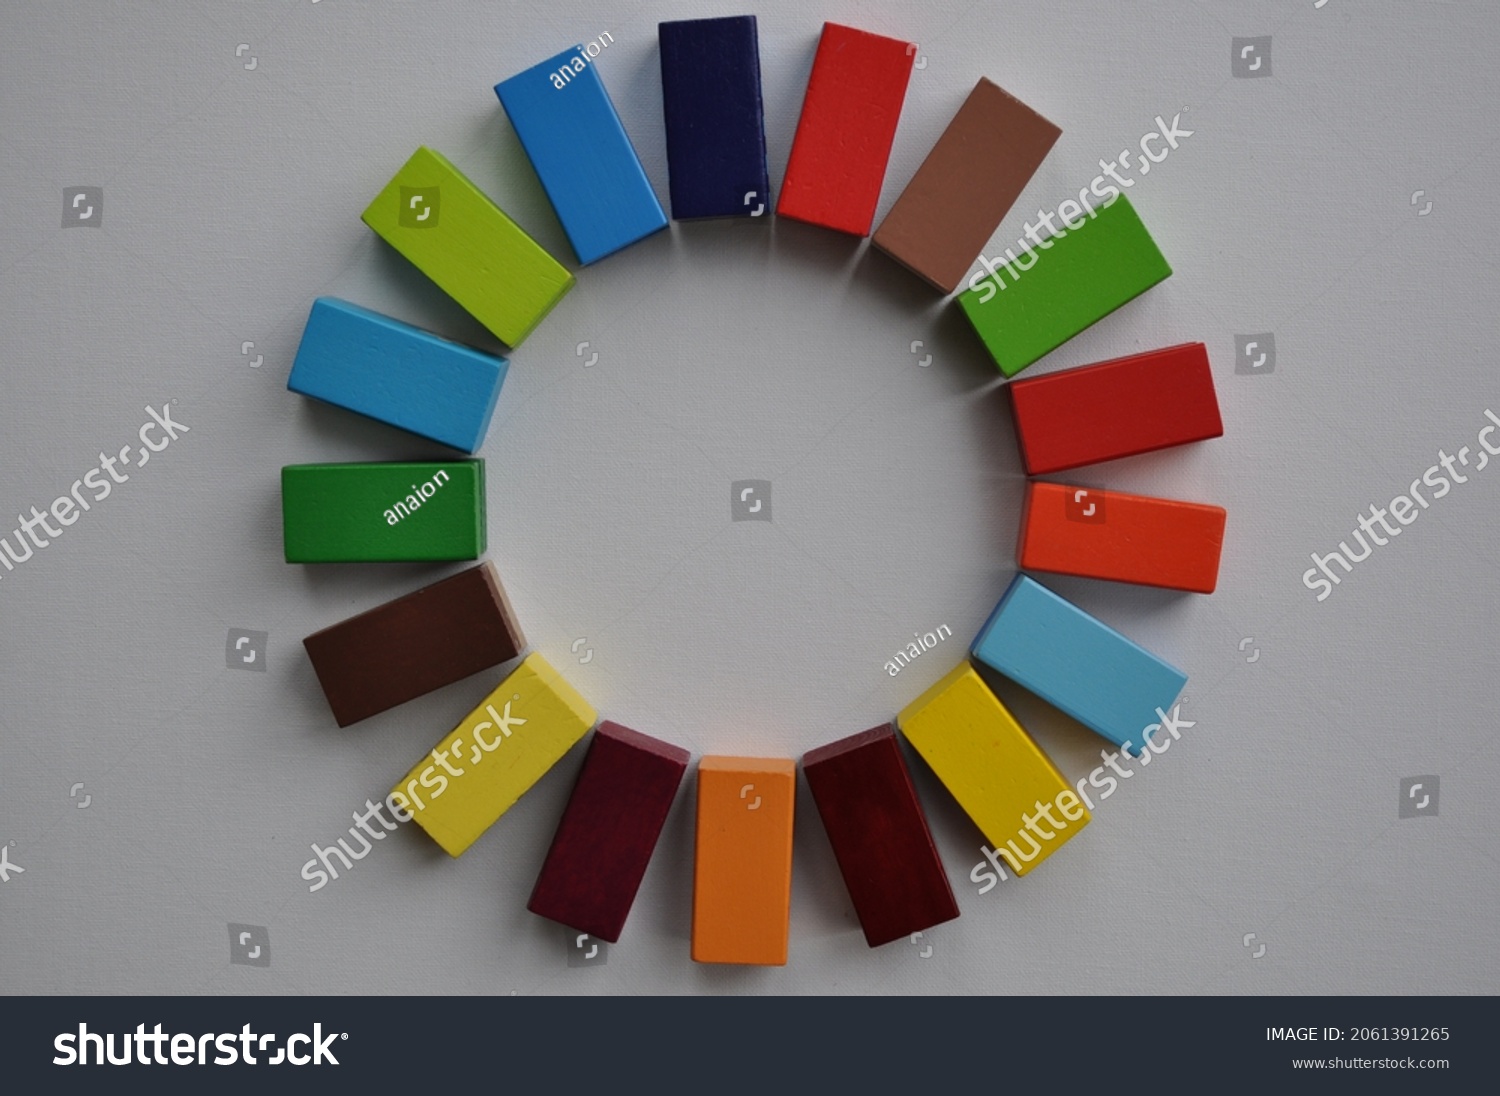 3D design in colourful toy wooden blocks reminiscent of the sustainable development goals logo. To convey ideas of sustainability, climate change, towards children. Not an official logo of the 17 SDG. #2061391265